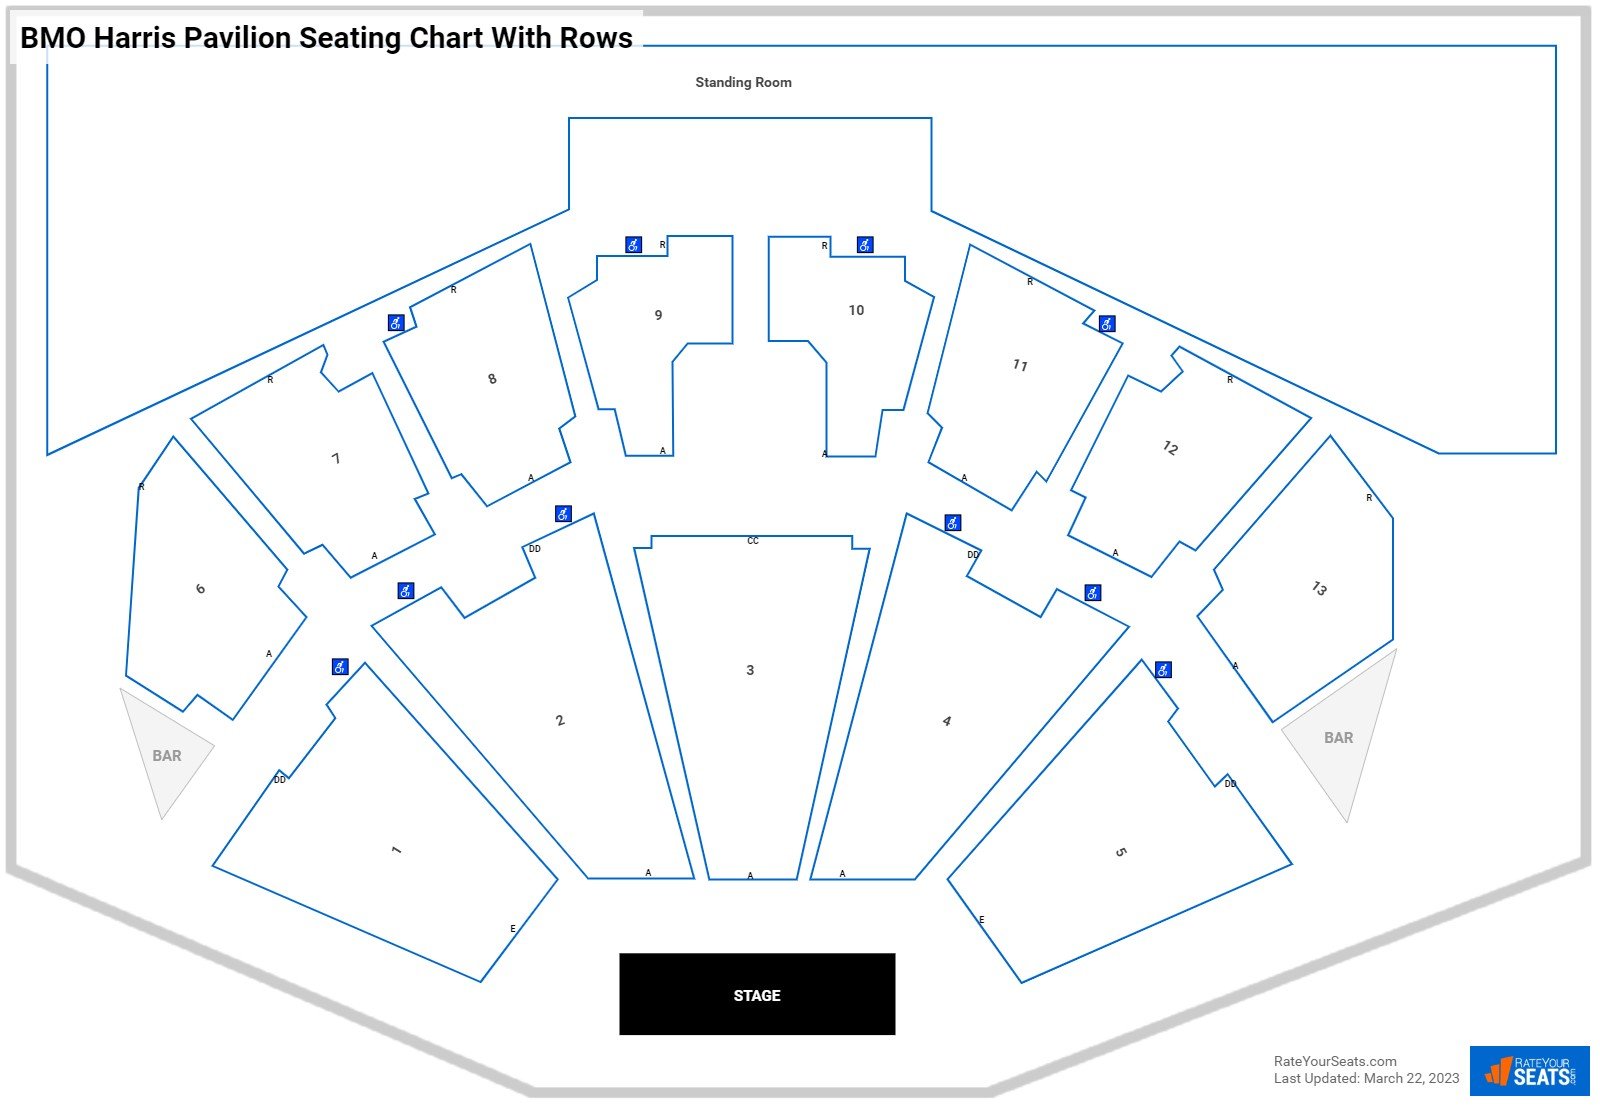 BMO Harris Pavilion seating chart with row numbers